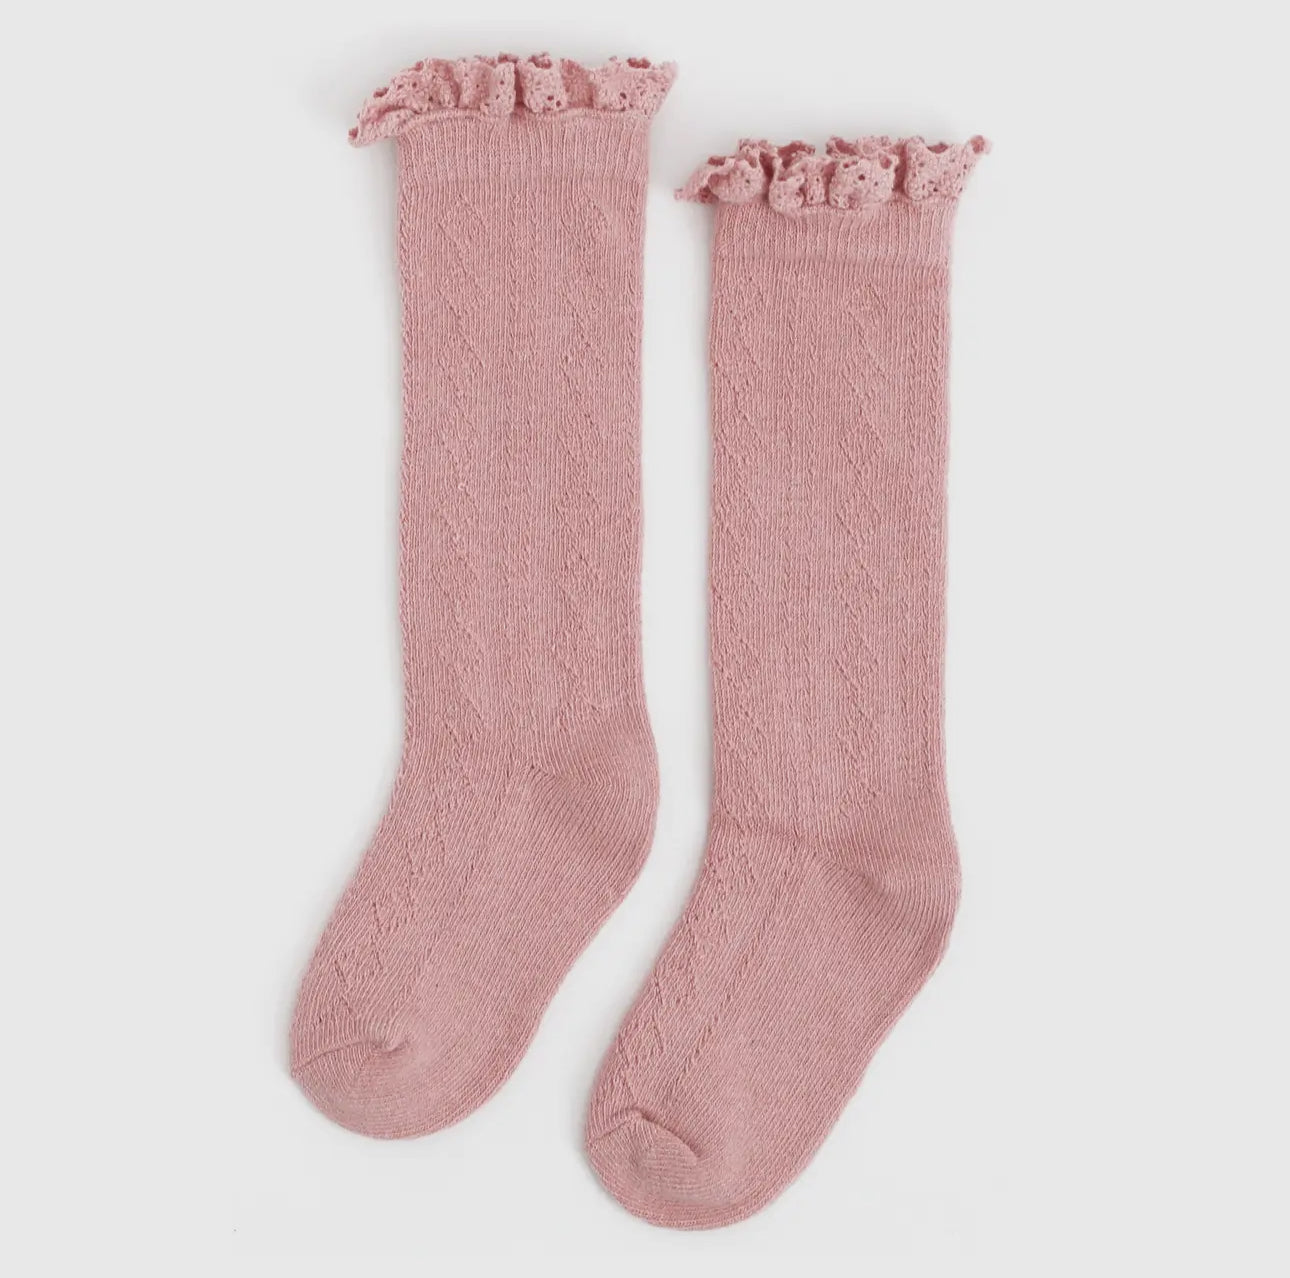 Little Stocking Co Lace Knee High Socks